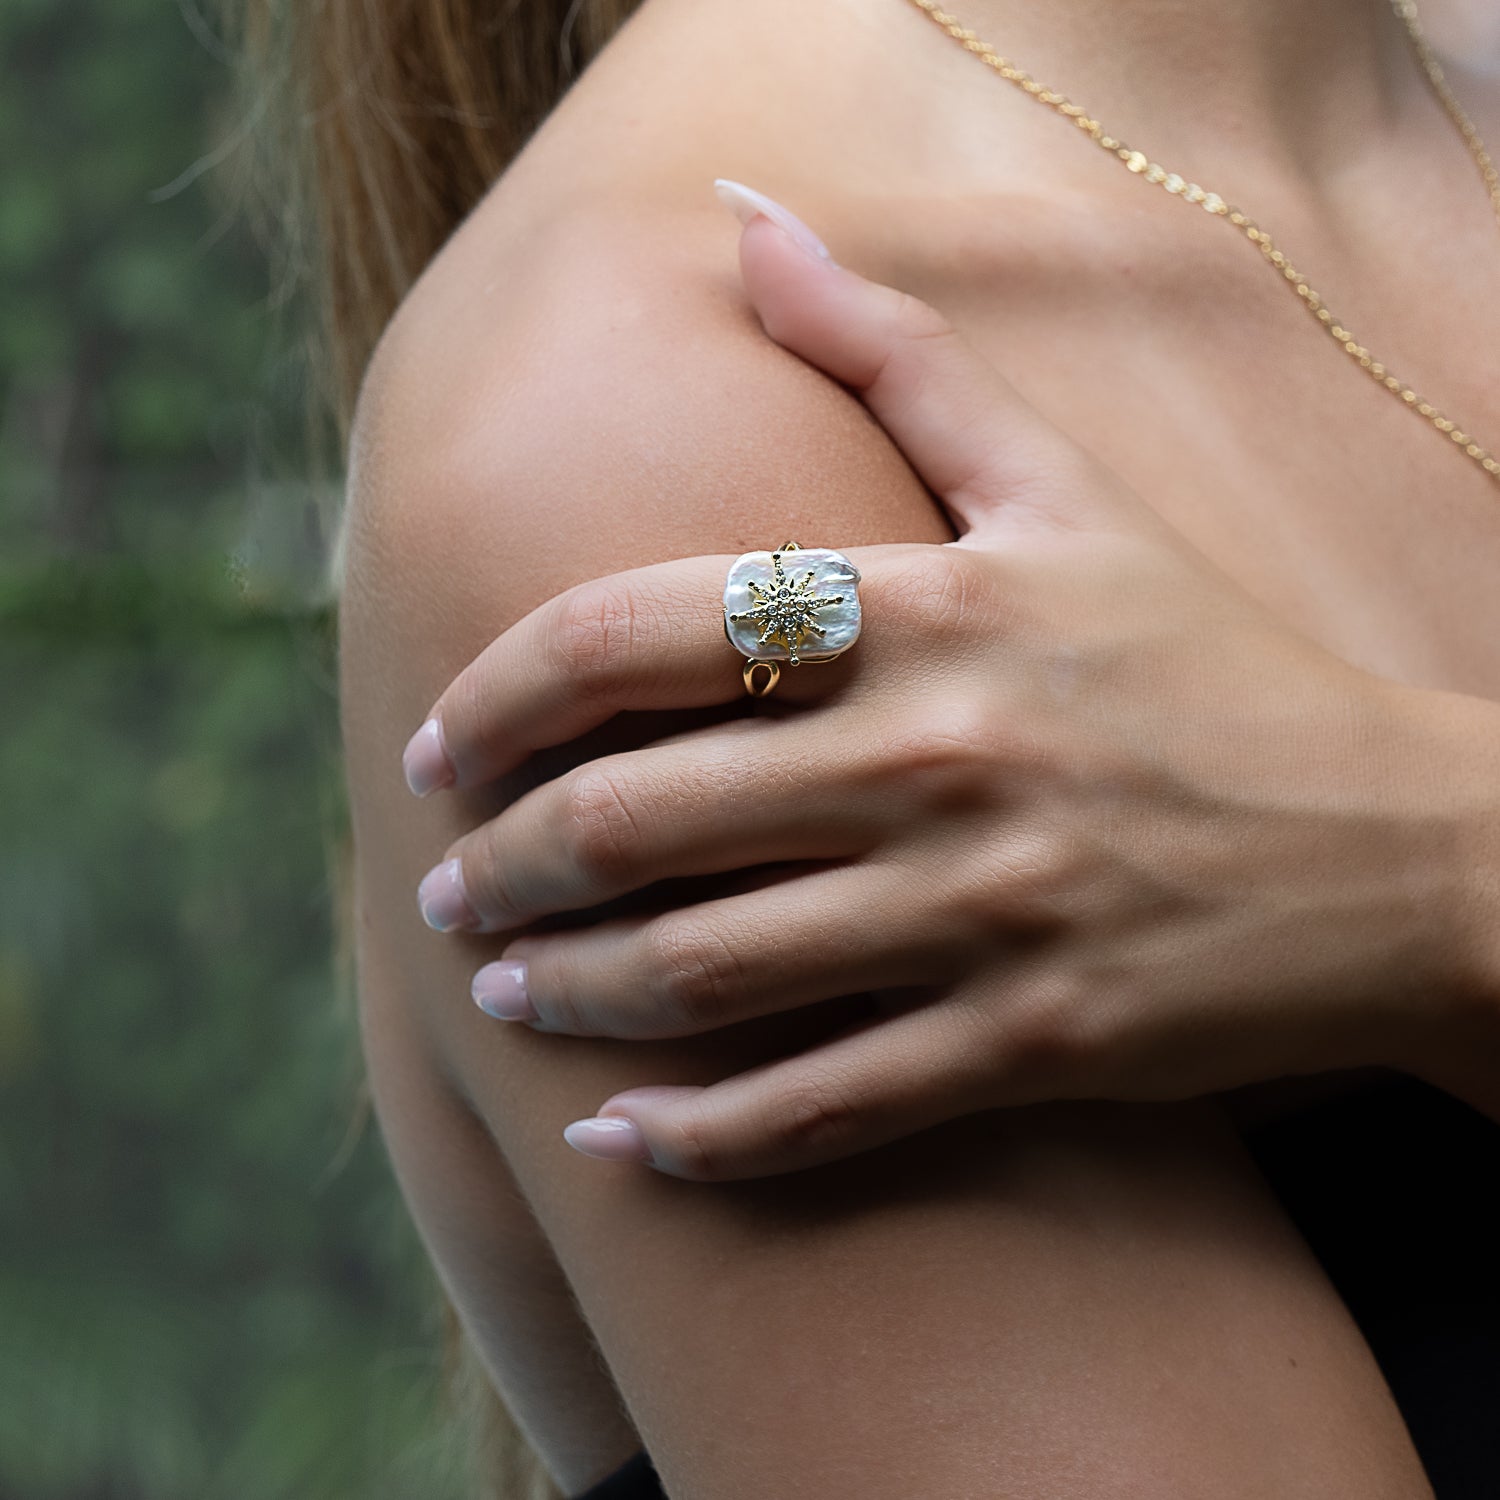 Channeling Cleopatra&#39;s allure: Model adorned with the elegant pearl ring.